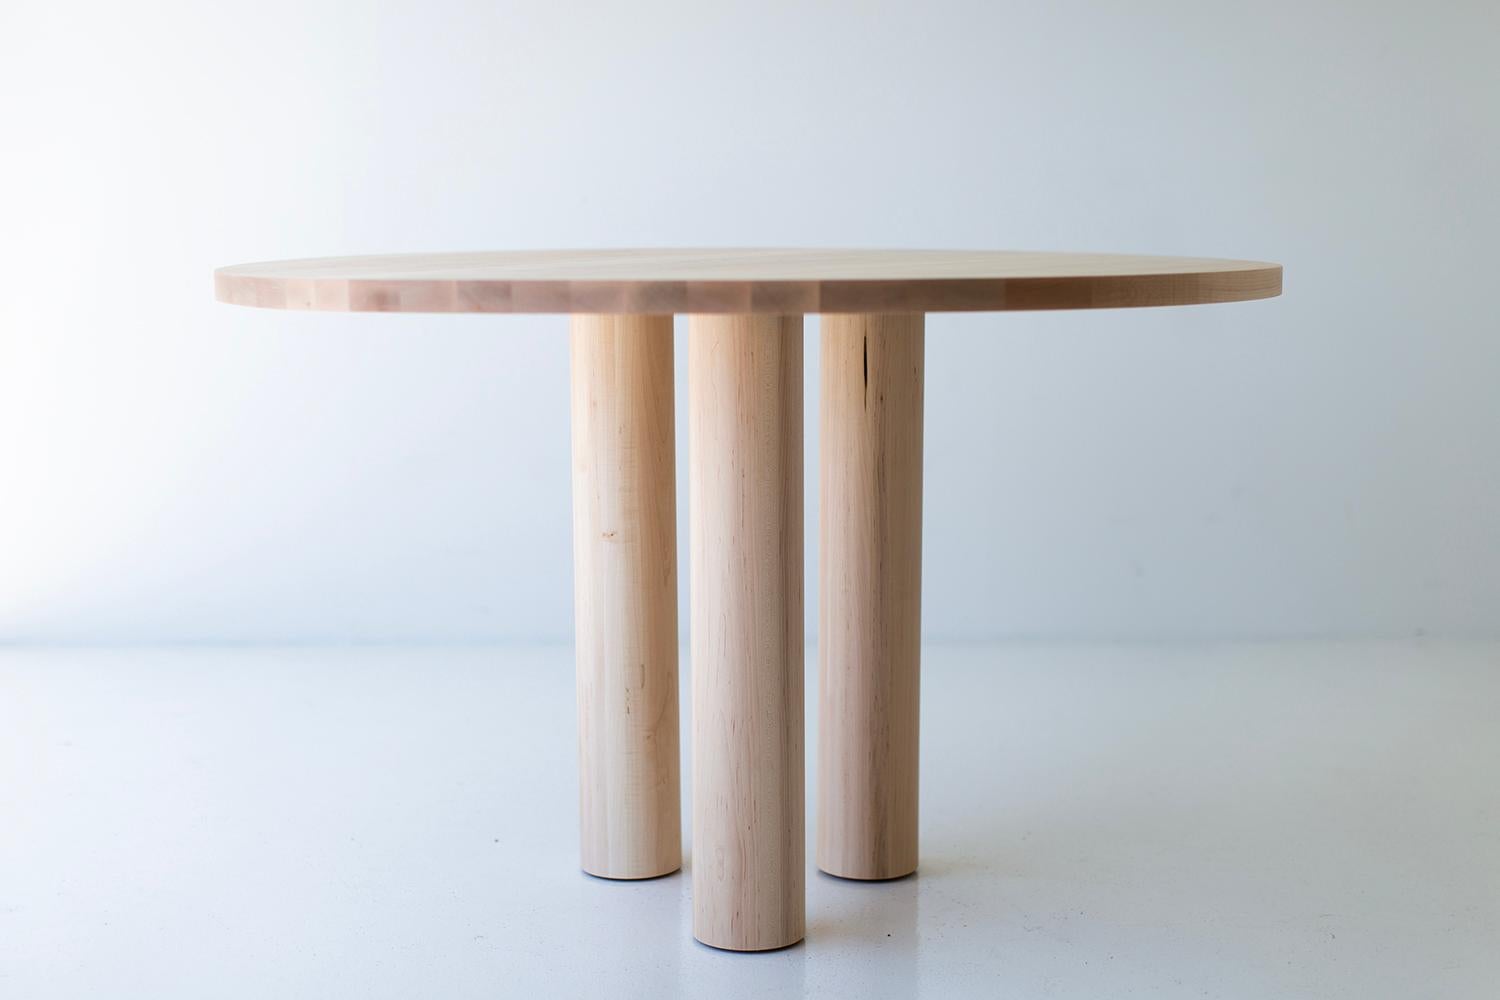 Bertu Dining Table, Modern Round Dining Table, Dining Table, Maple, Cava

This Cava Modern Round Dining Table in Maple is made in the heart of Ohio with locally sourced wood. We use the table both as a dining table and desk. Each table is hand-made